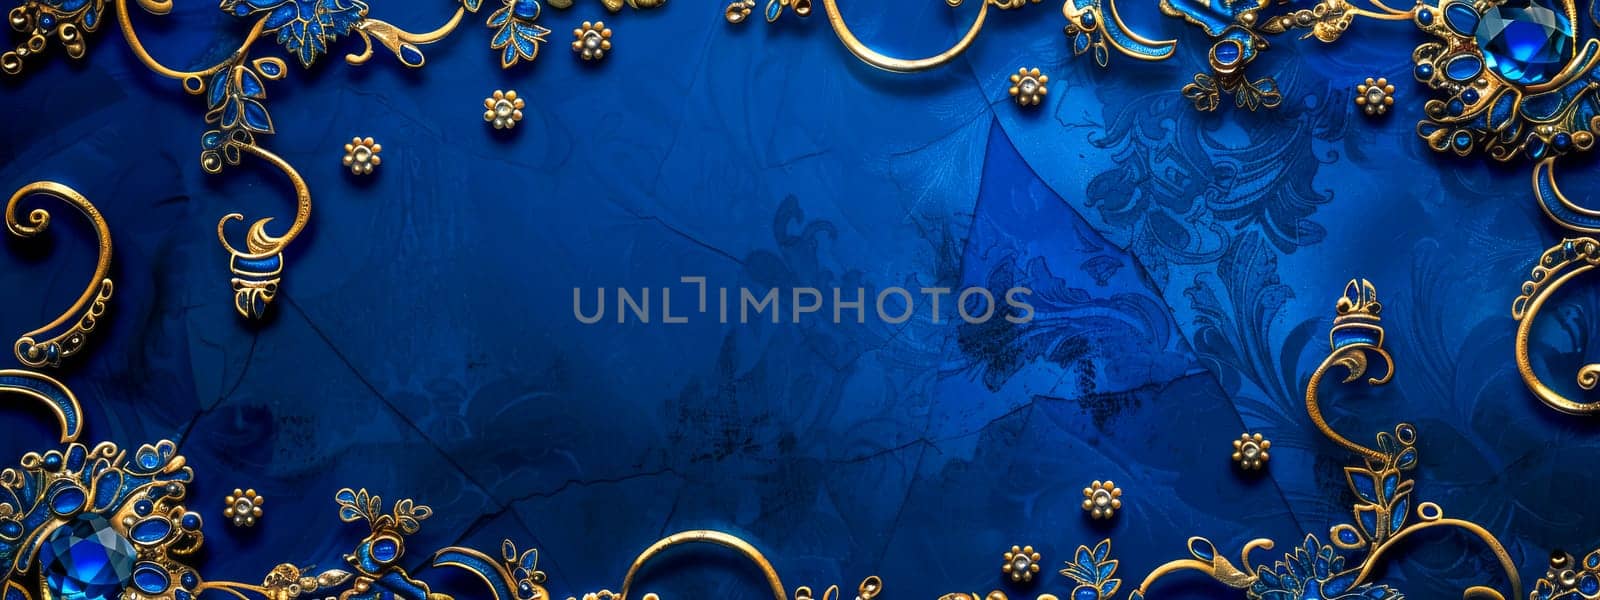 Luxurious blue textured background with ornate gold floral designs and gem accents